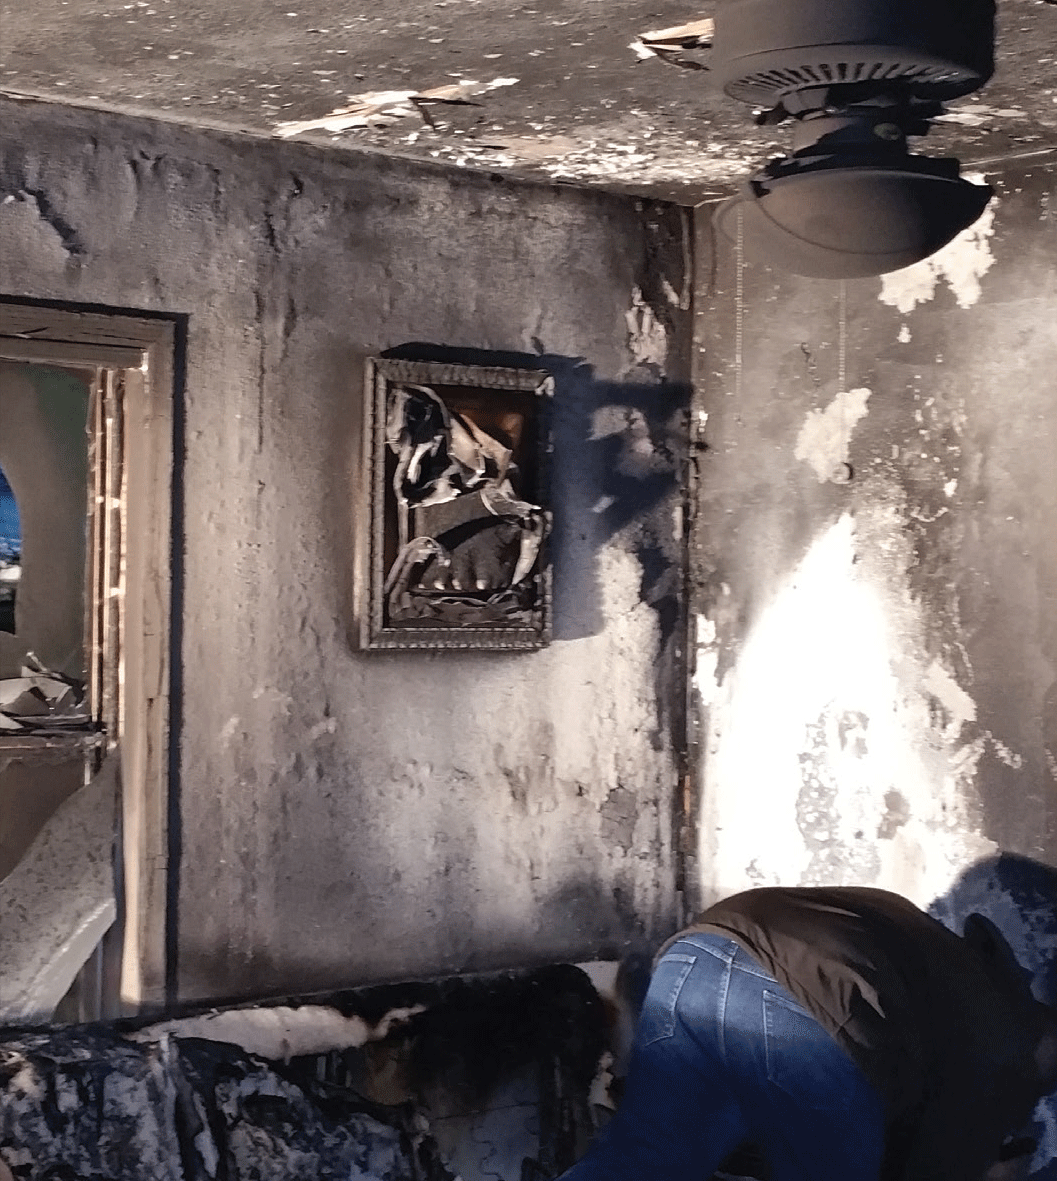 Why is Electrical Safety important to Fire Prevention?